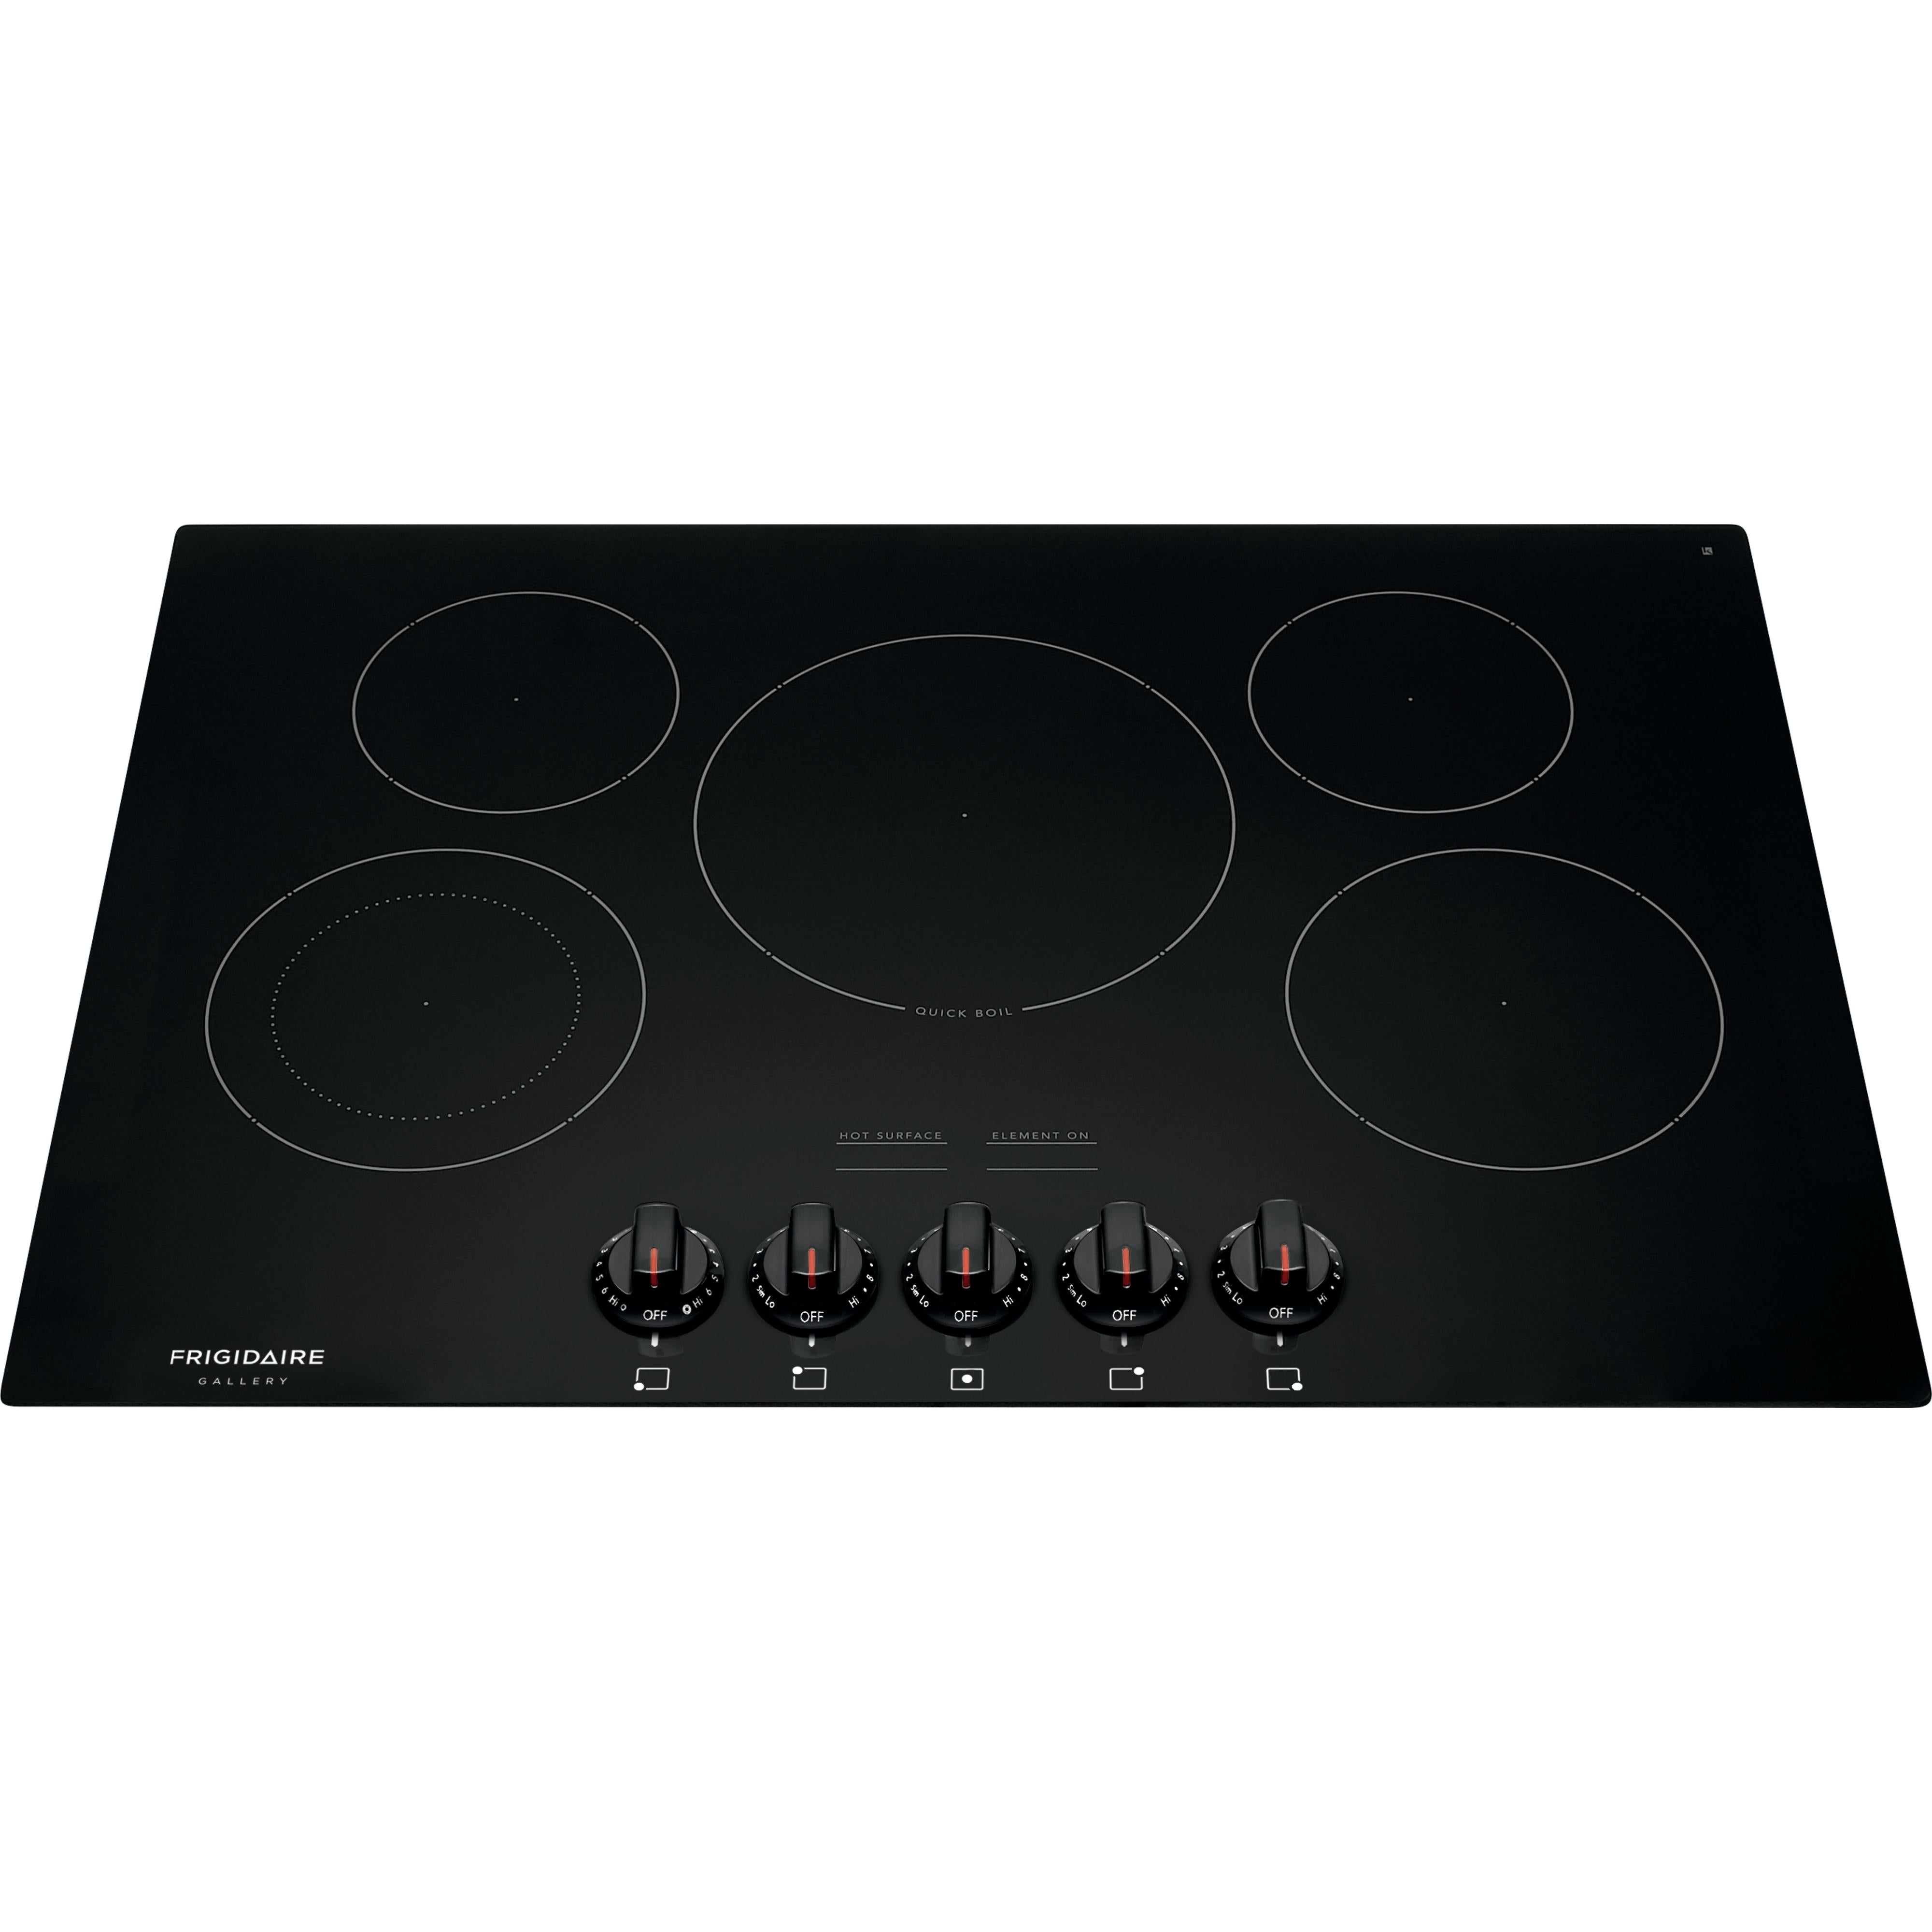 Frigidaire Gallery 30-inch Built-in Electric Cooktop FGEC3068UB